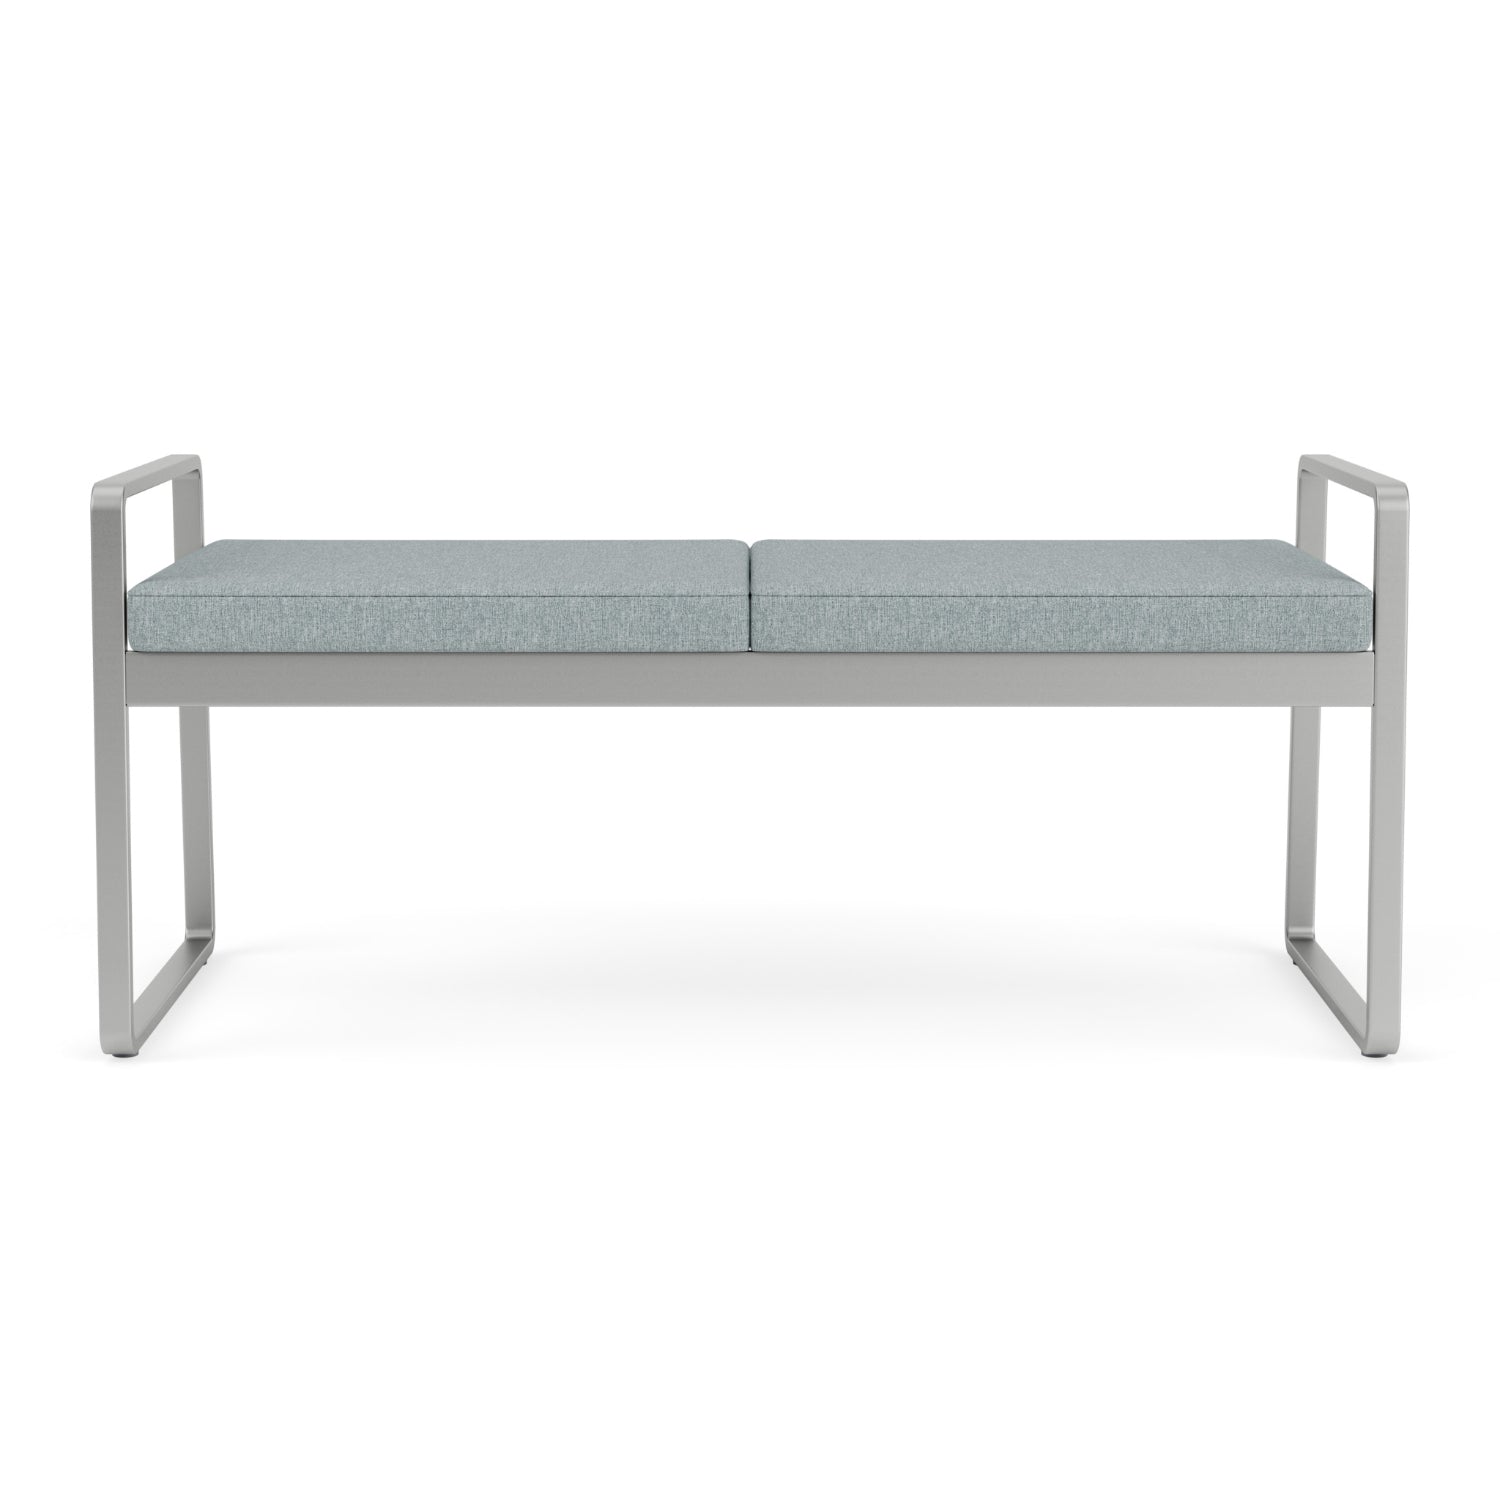 Gansett Collection Reception Seating, 2 Seat Bench, Healthcare Vinyl Upholstery, FREE SHIPPING